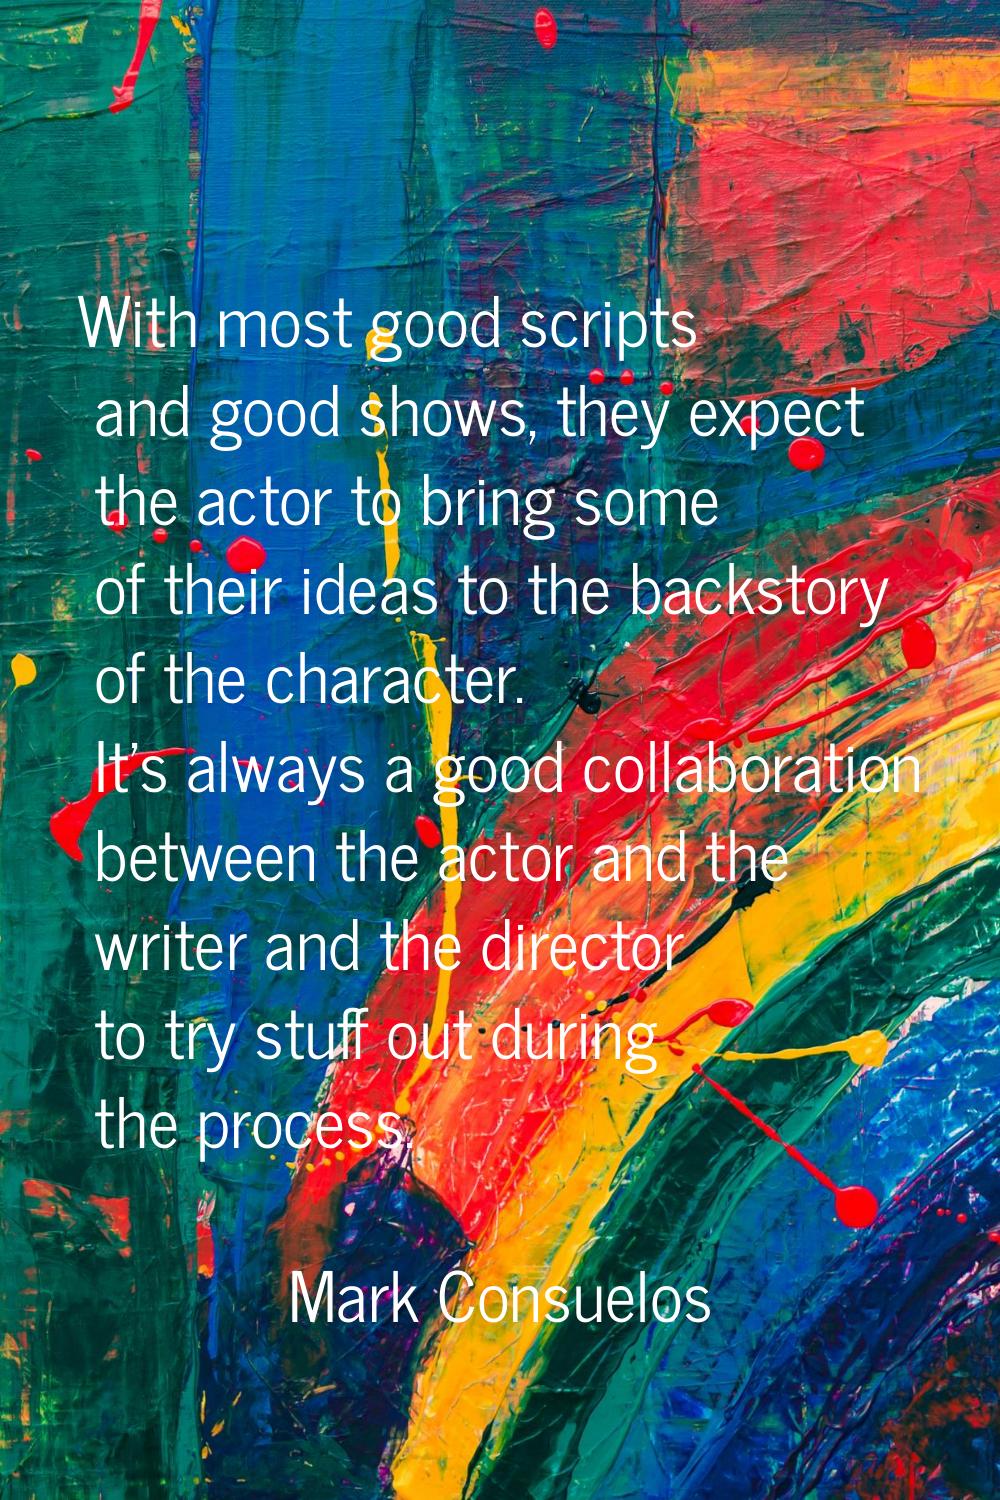 With most good scripts and good shows, they expect the actor to bring some of their ideas to the ba